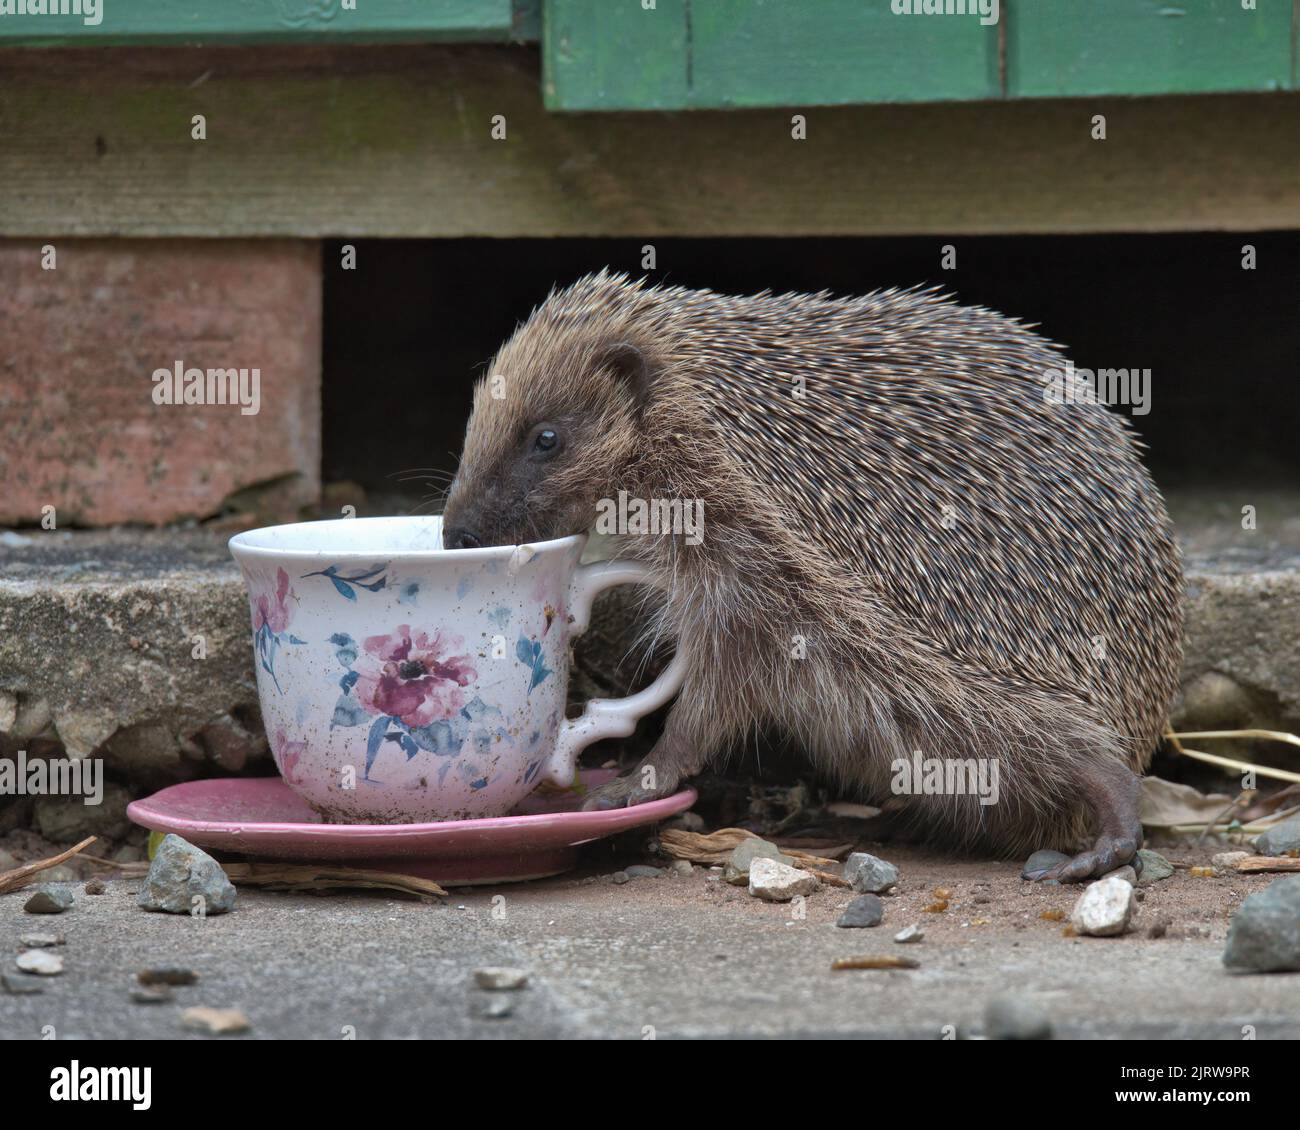 European hedgehog eating bird food from a cup and saucer. Stock Photo